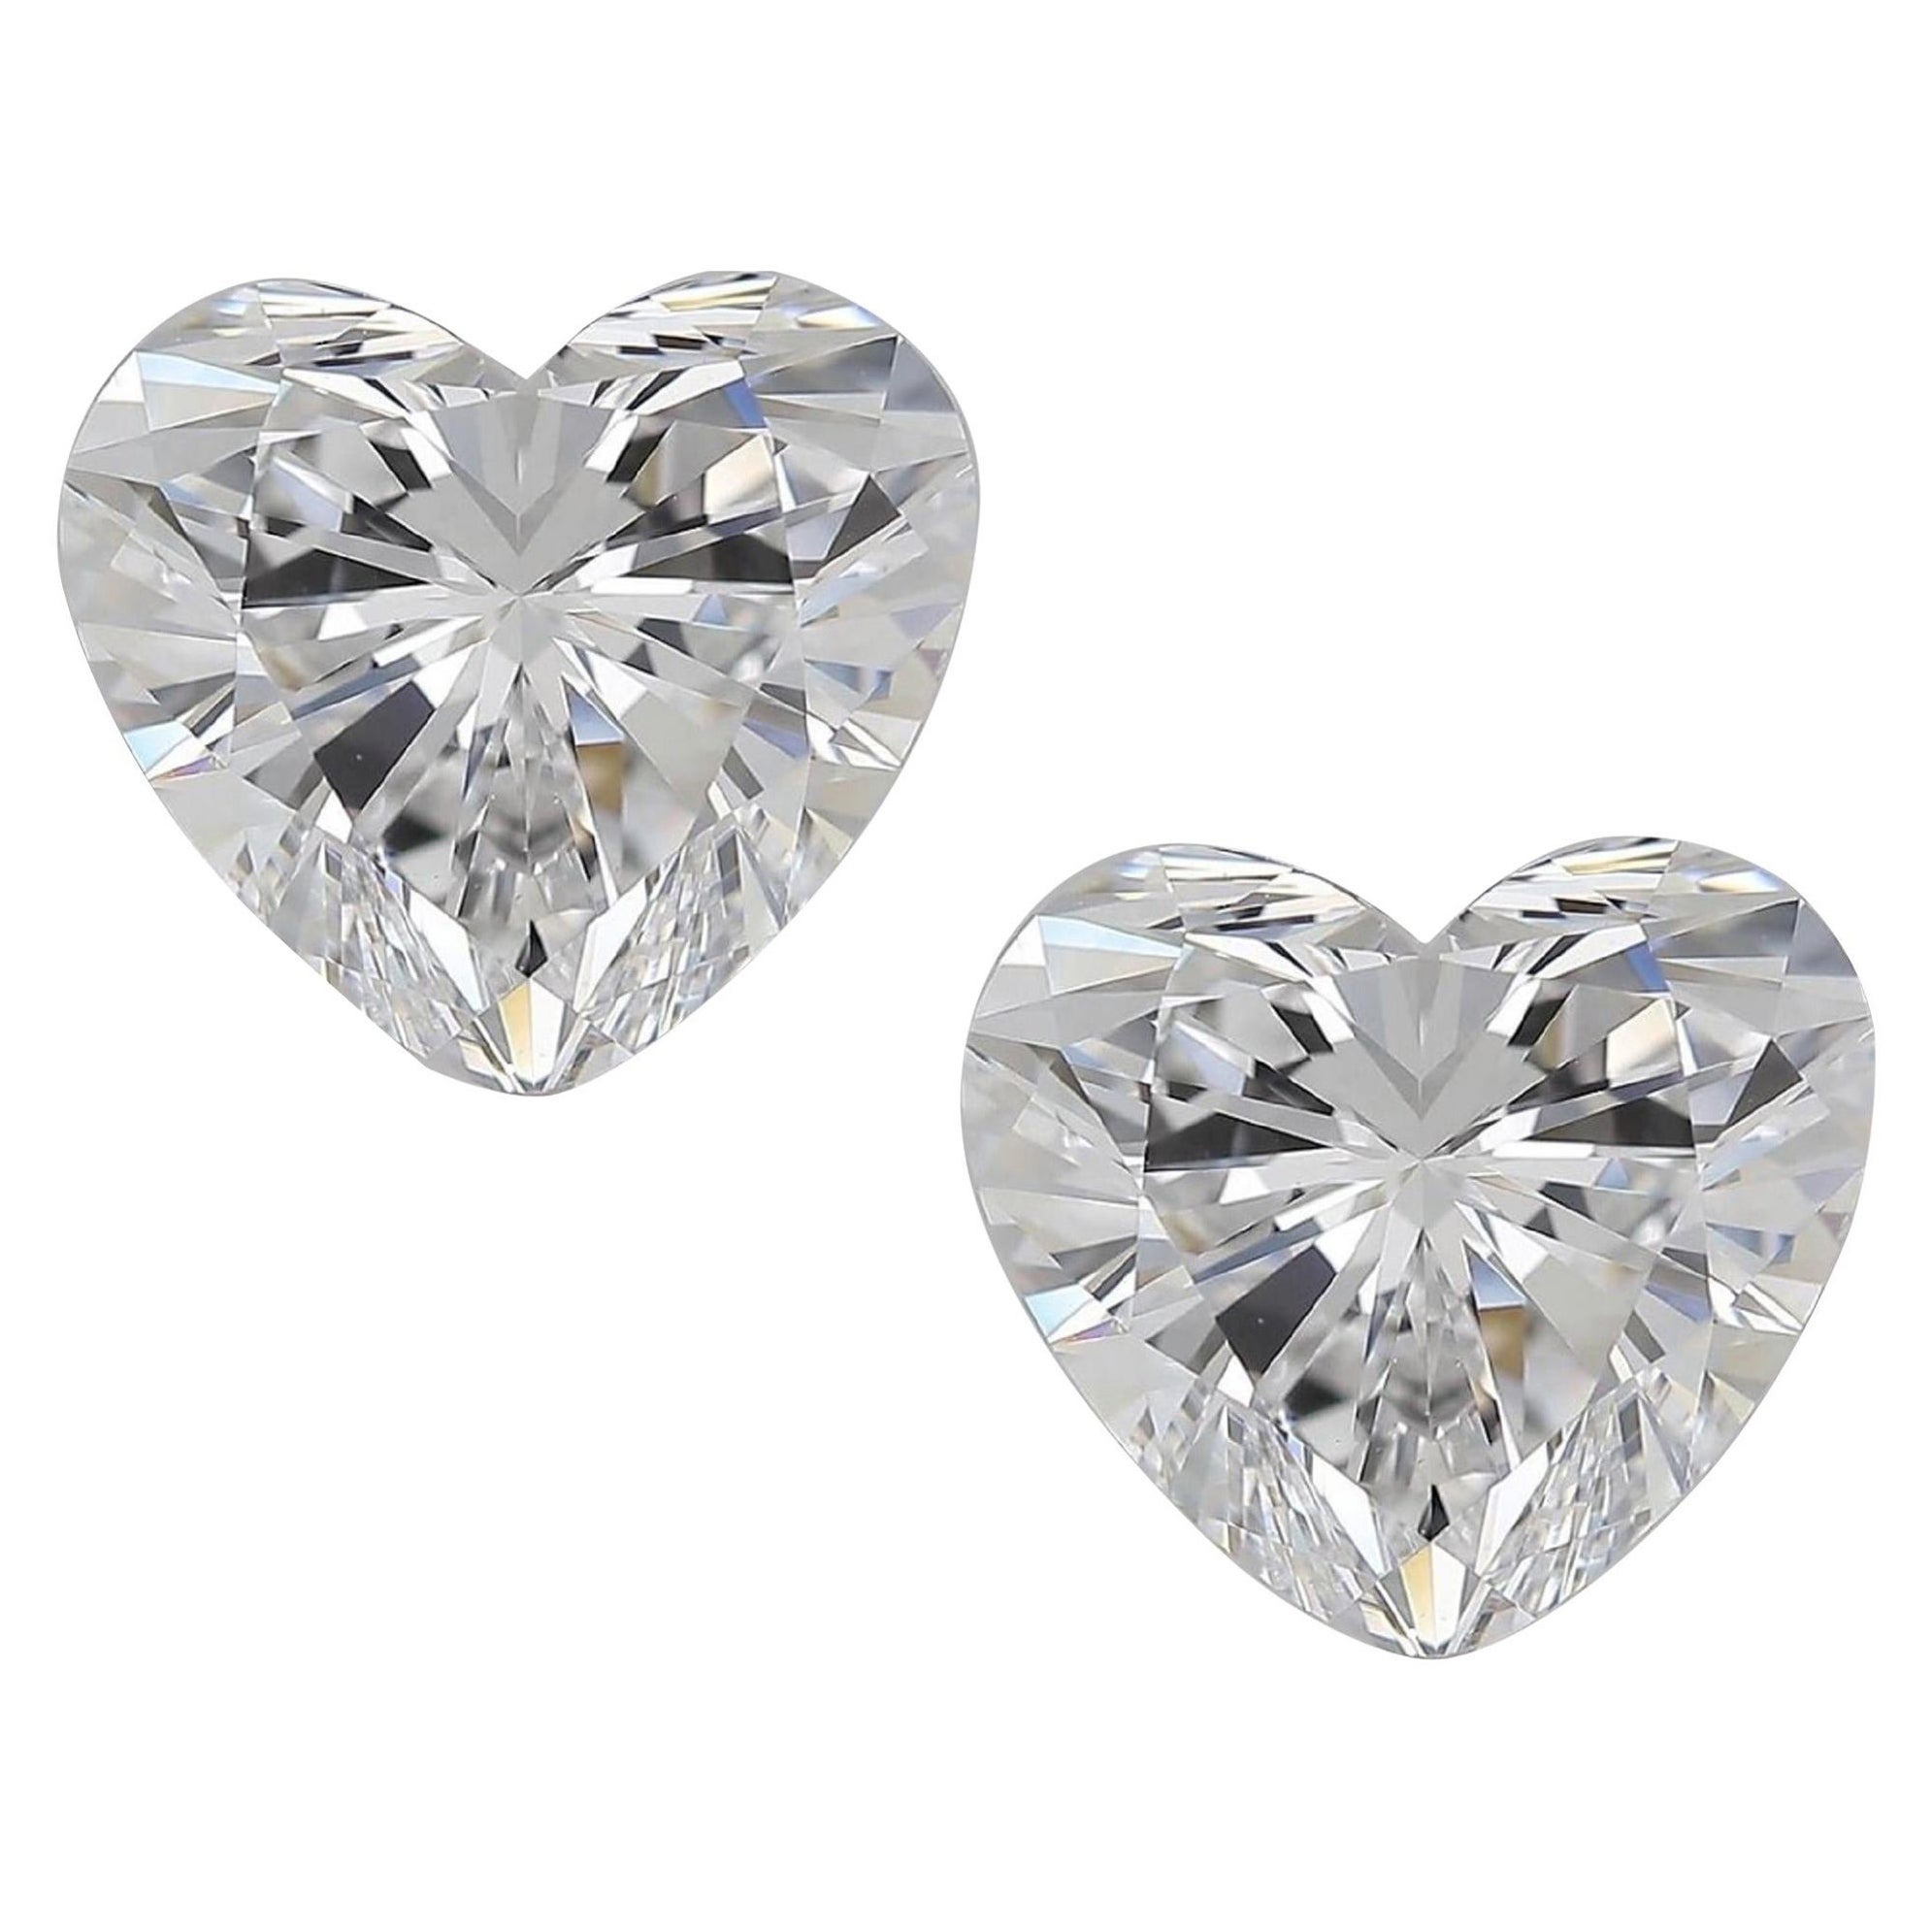 Elevate your elegance with this exquisite pair of heart-cut diamond earrings. Set in lustrous platinum studs, these remarkable gems boast a captivating allure. The diamonds, radiate a brilliance that catches every glimmer of light, ensuring a